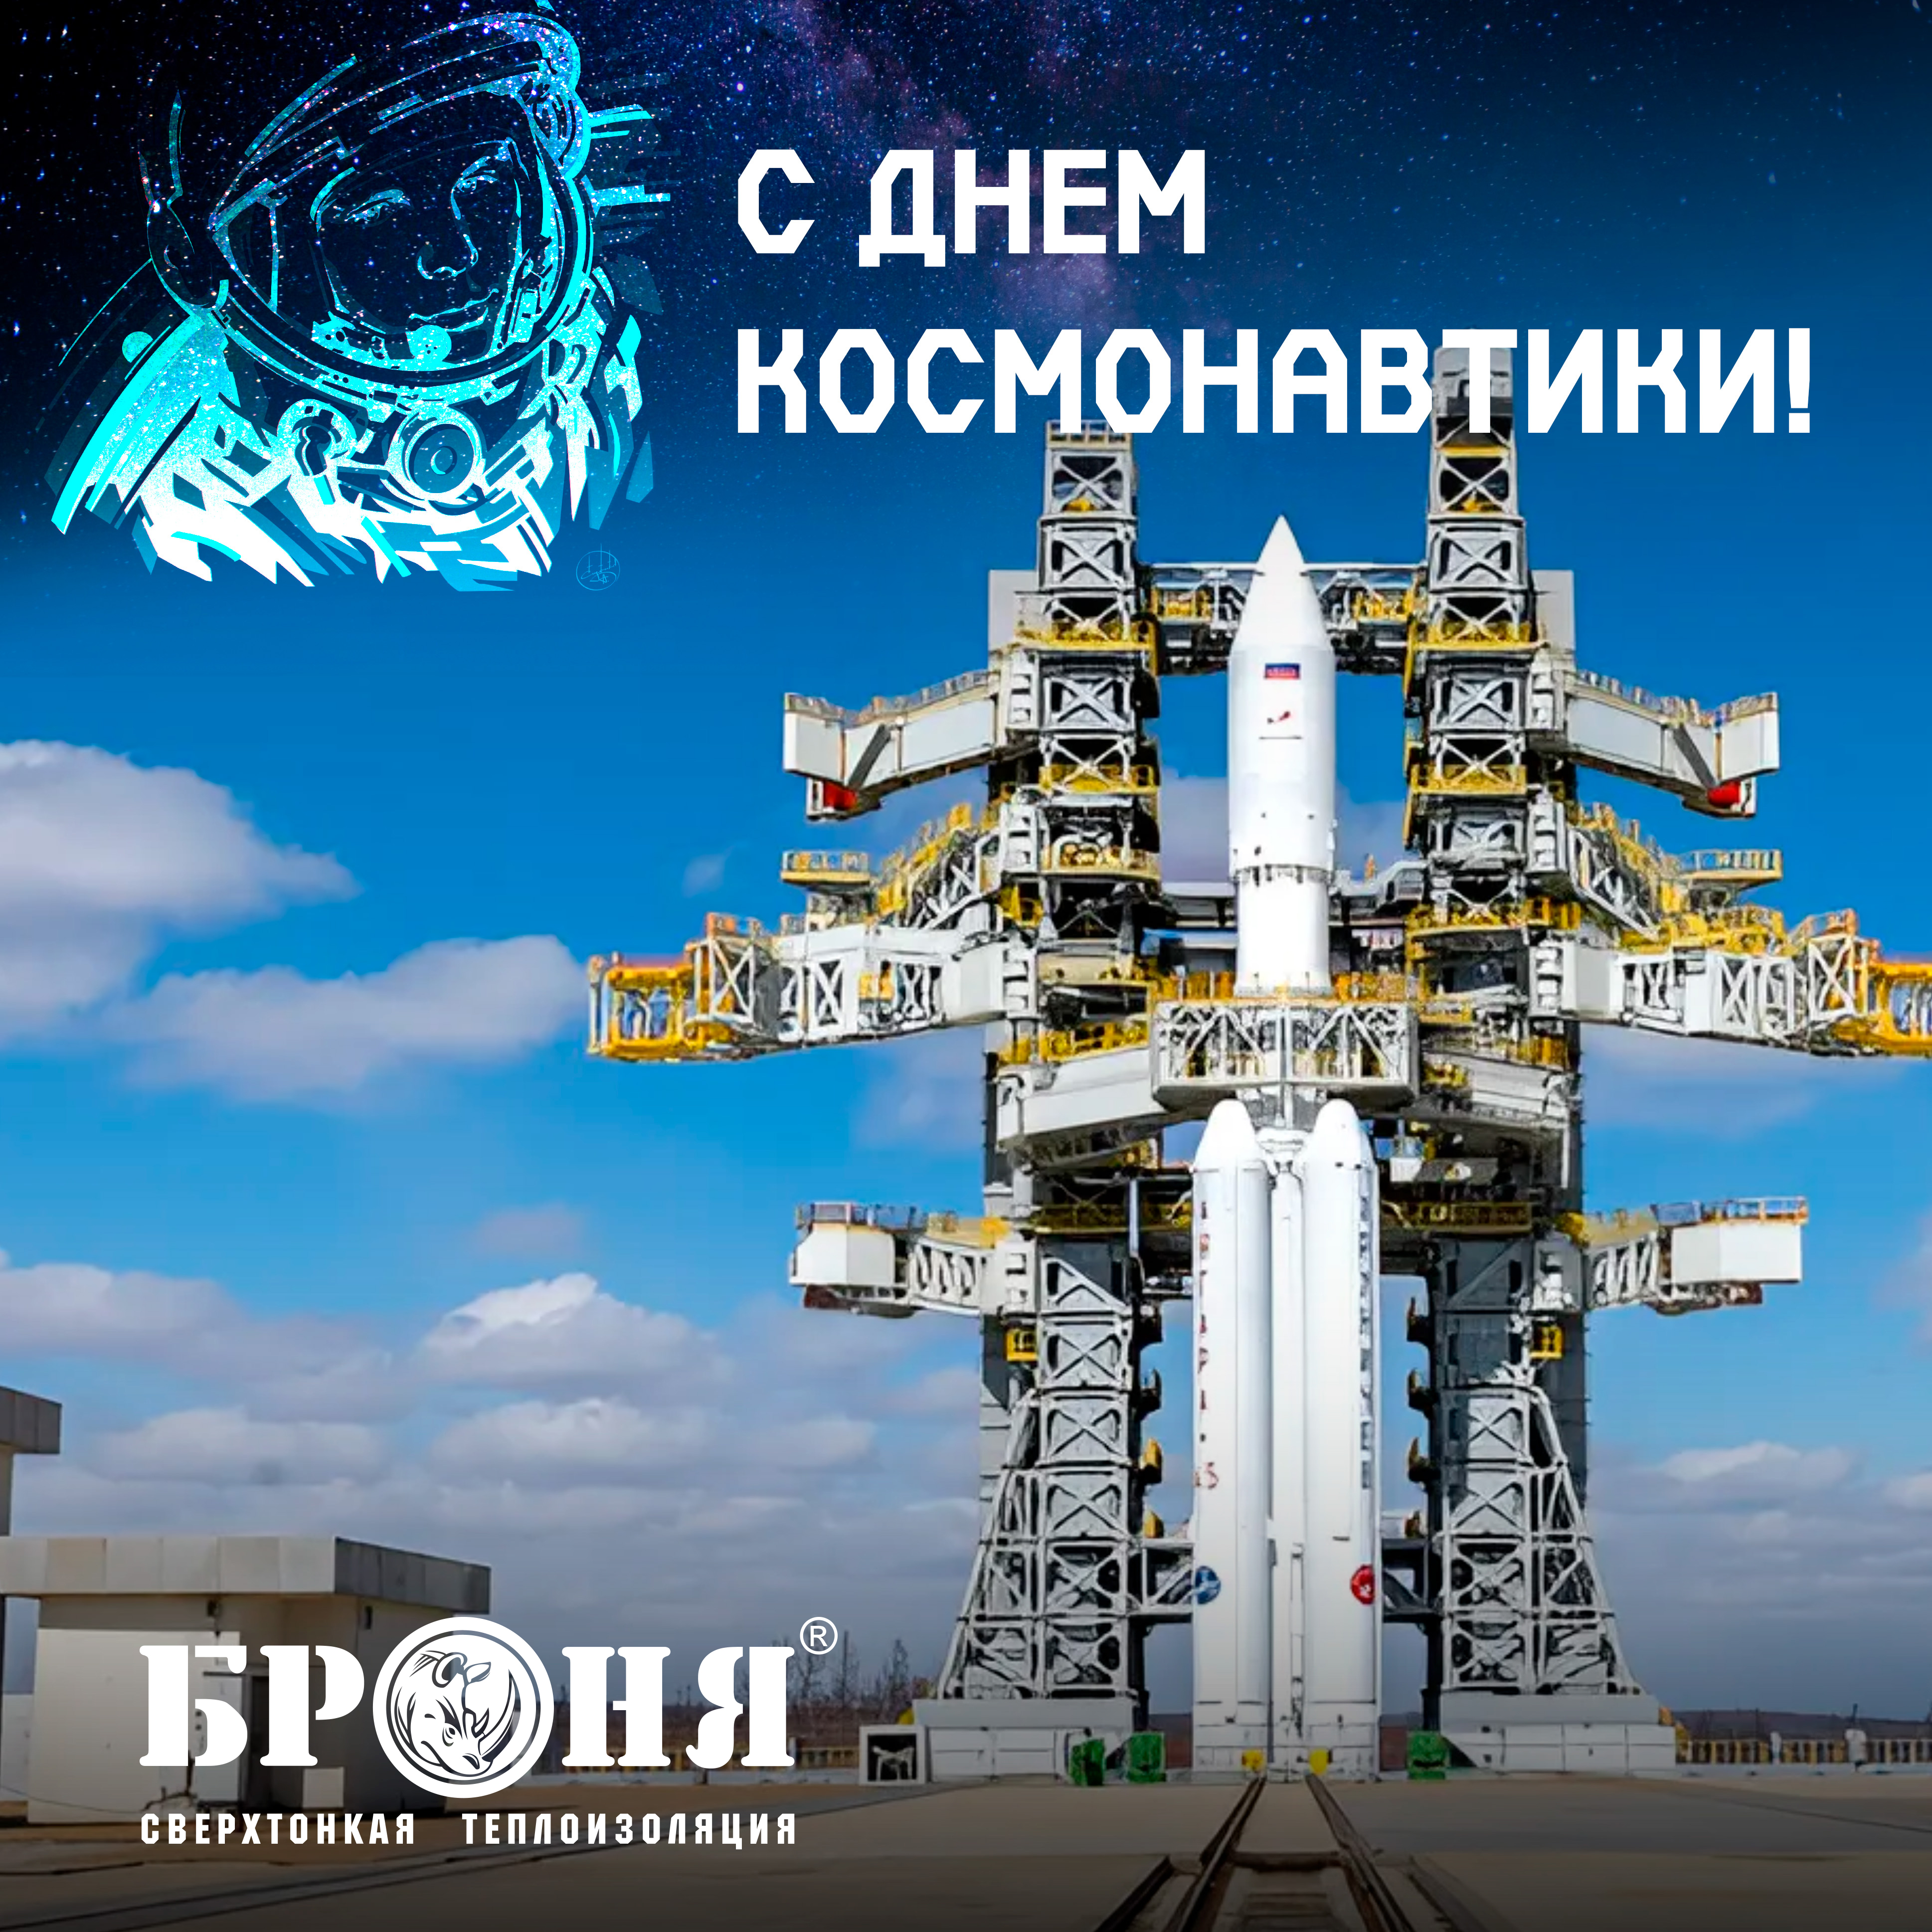 Congratulations on Cosmonautics Day and the successful launch of the Angara-A5 rocket along with Bronya! (photos and videos) 